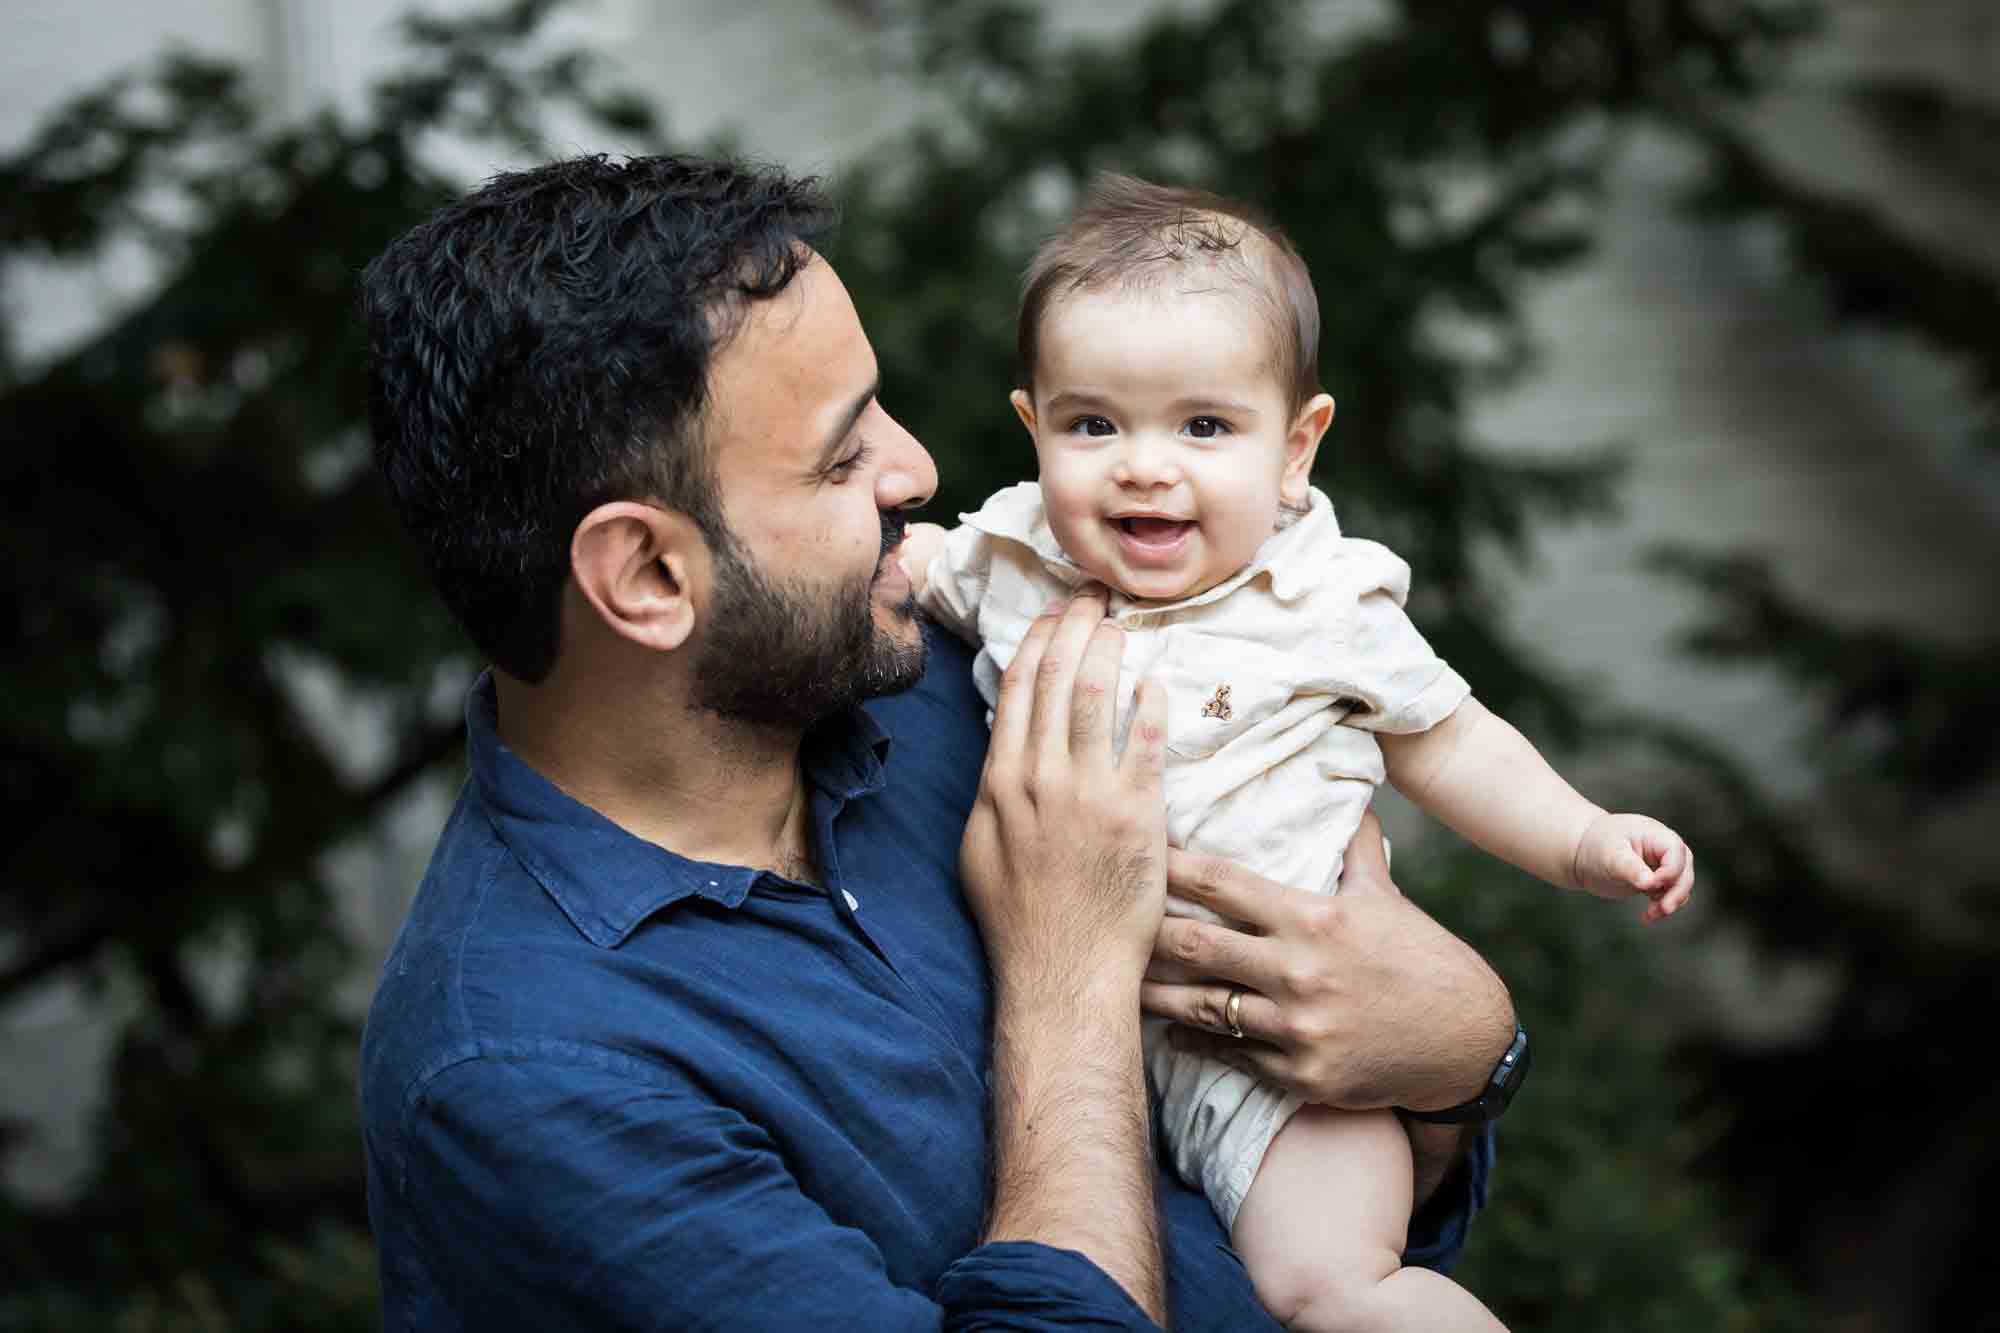 Father wearing blue shirt holding baby boy during a Brooklyn Commons family portrait session